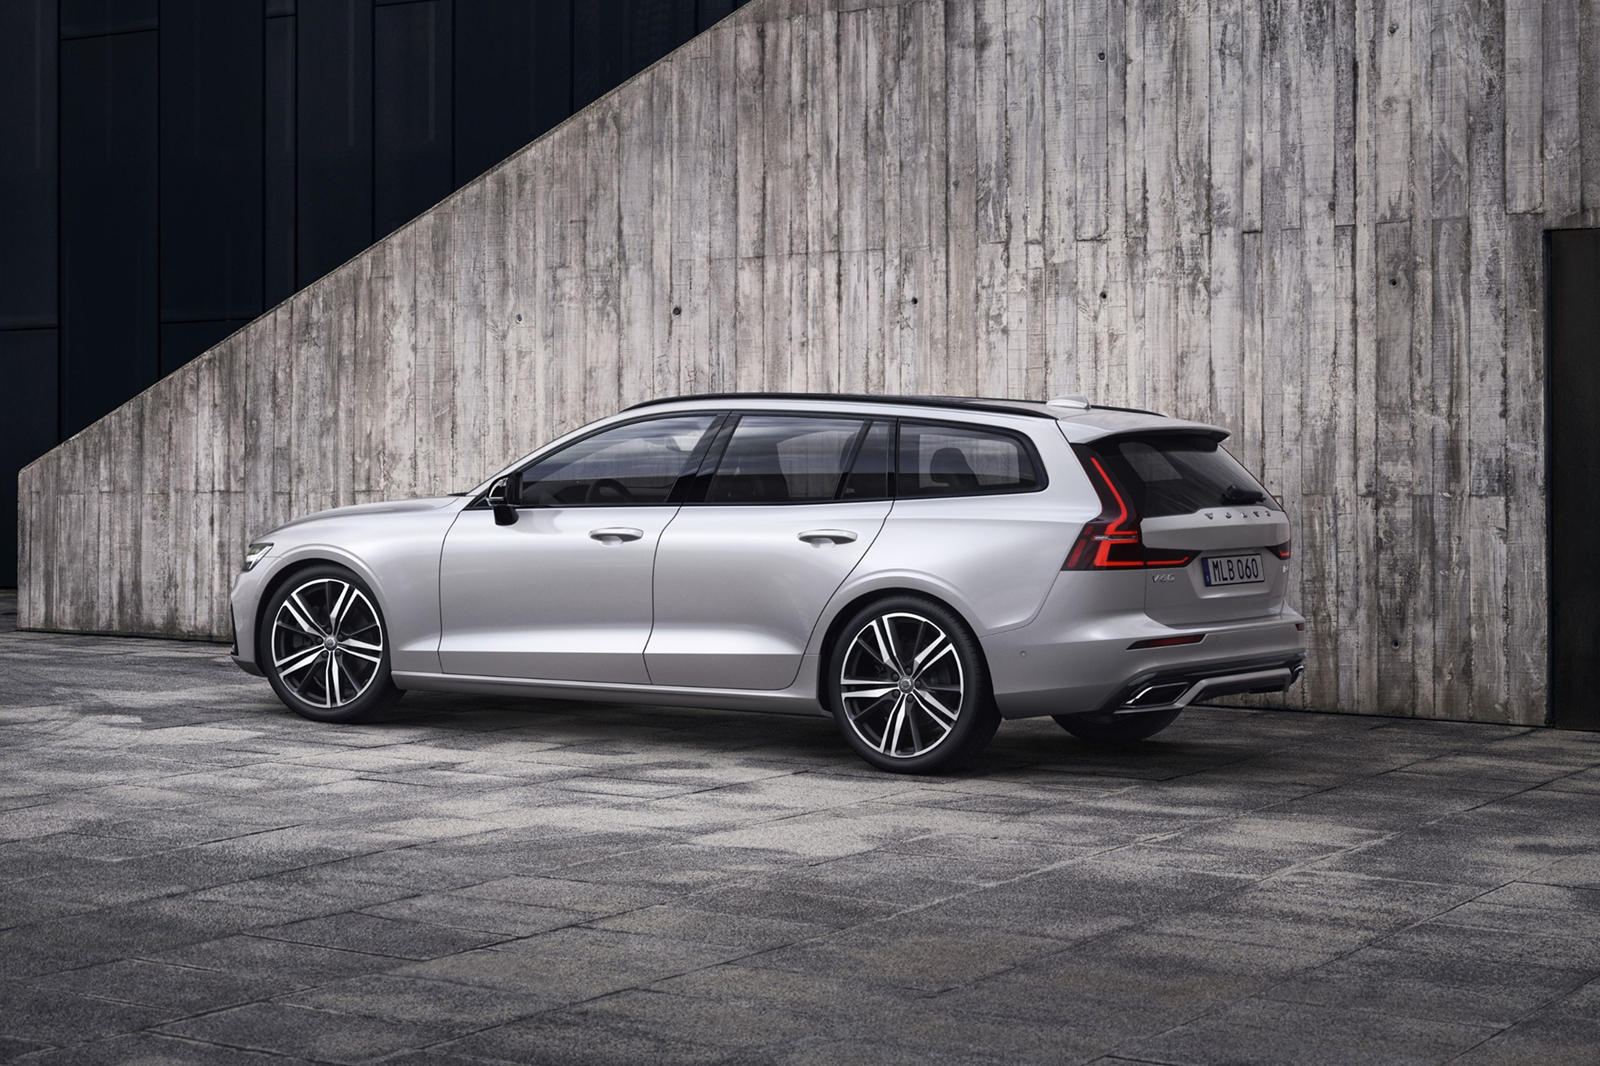 2022 Volvo V60 Recharge Side View Carbuzz 778085 1600 